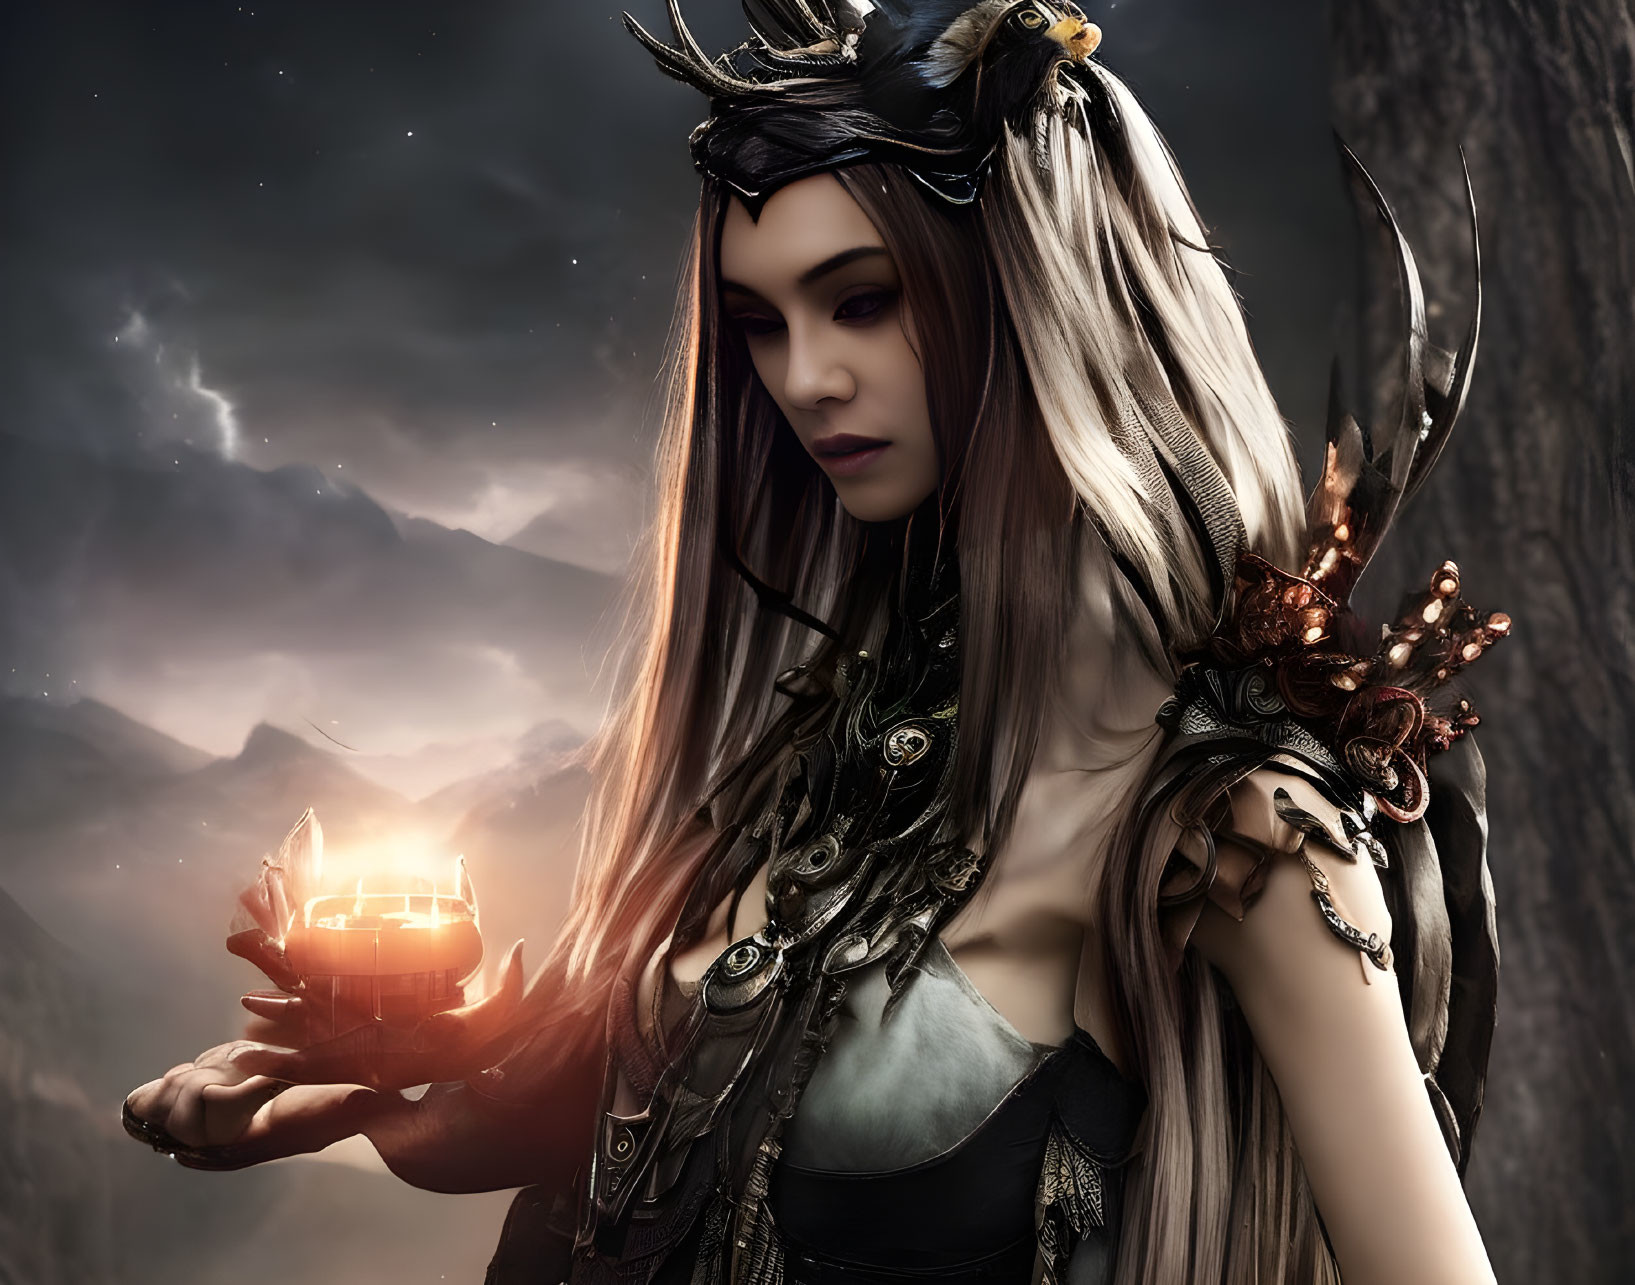 Mystical woman in dark fantasy attire holding glowing orb with misty mountain backdrop